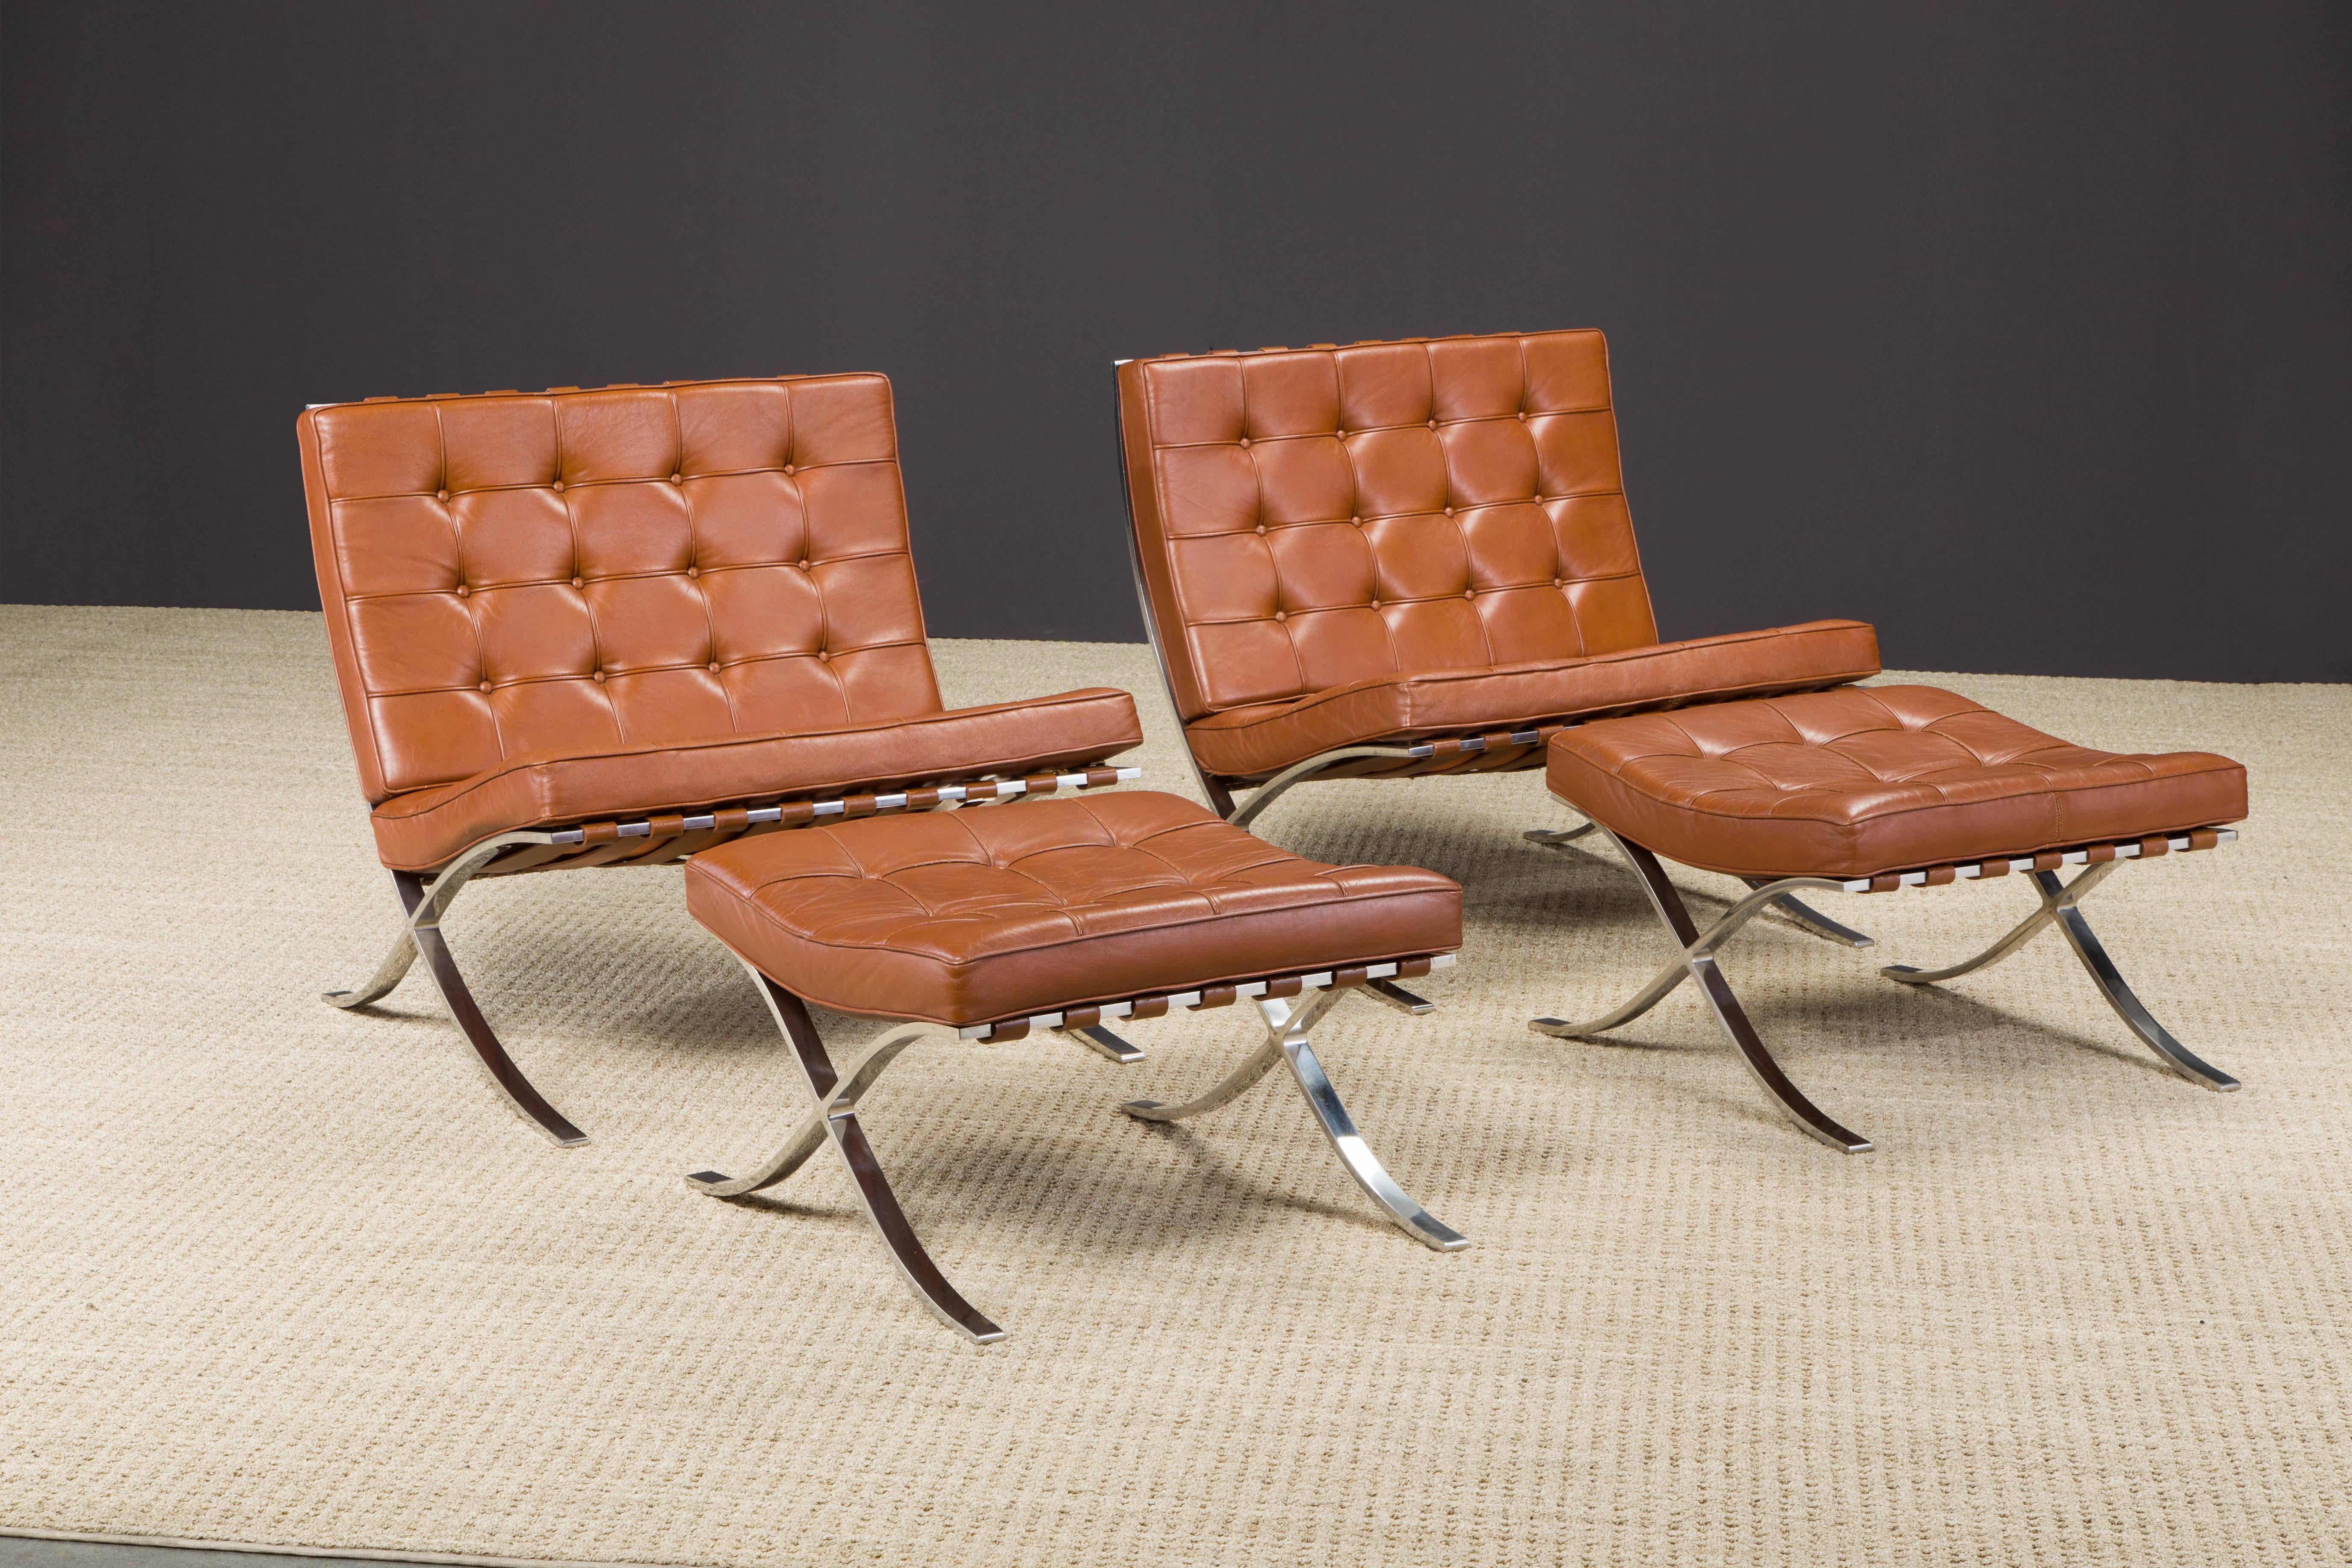 1st-Gen Knoll Barcelona Lounge Set by Mies Van Der Rohe, c. 1968, Double-Signed 11